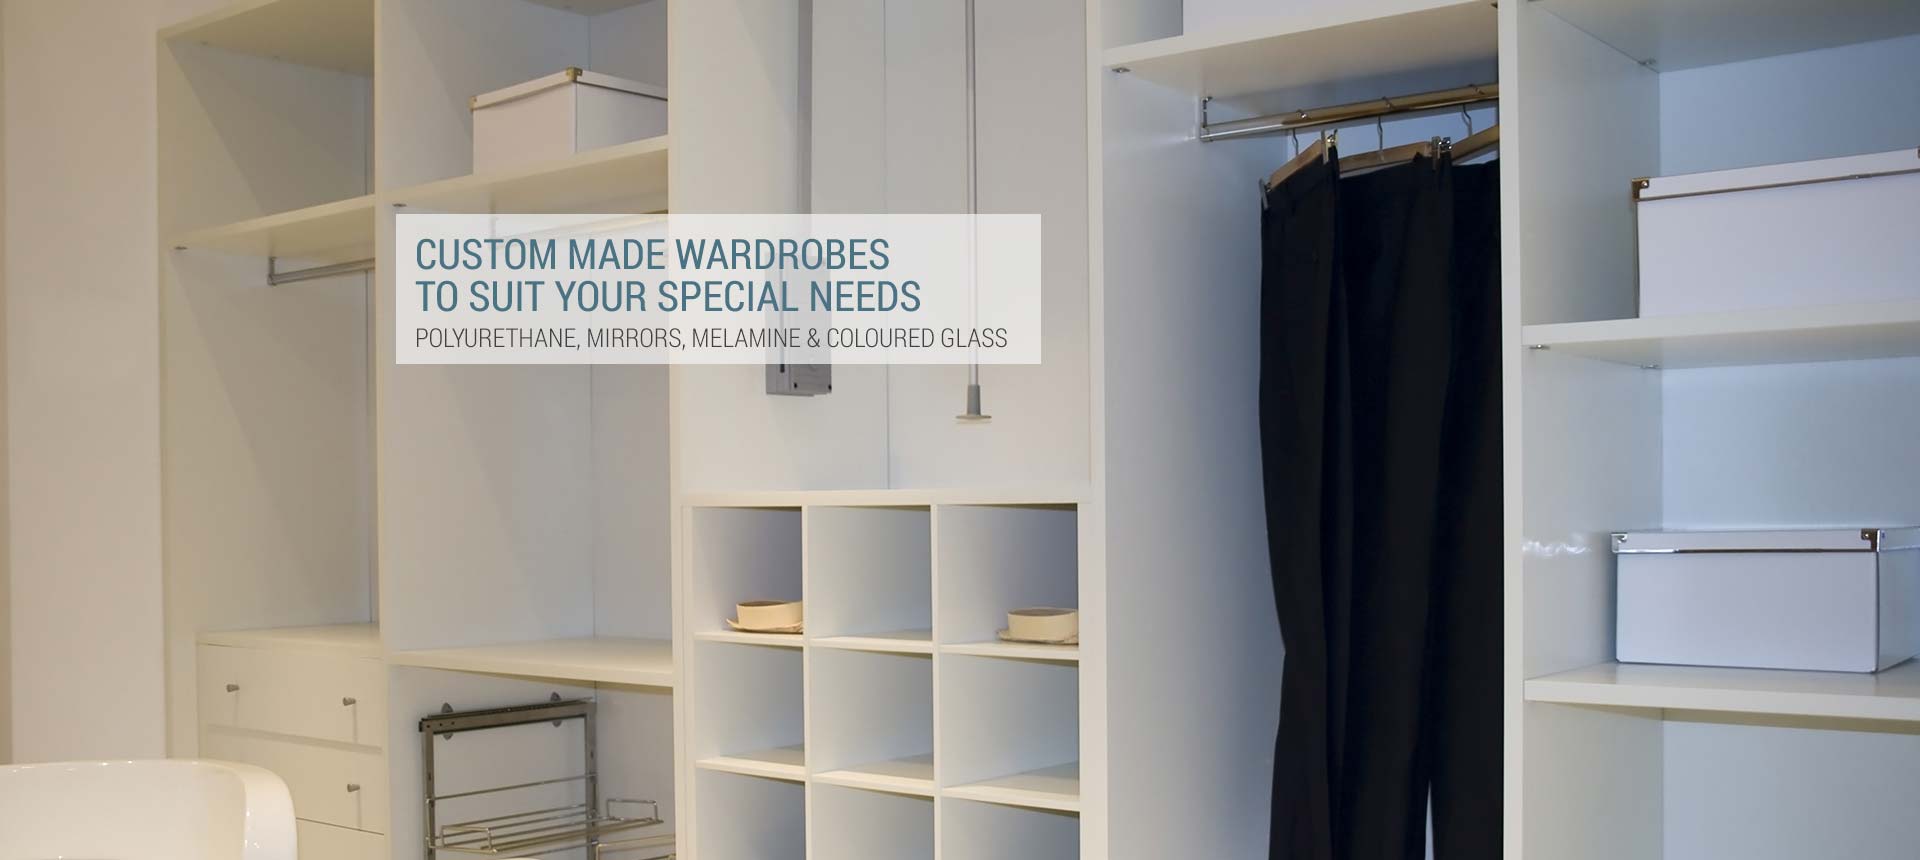 Sliderobes - Custom Made Wardrobes To Suit Your Needs